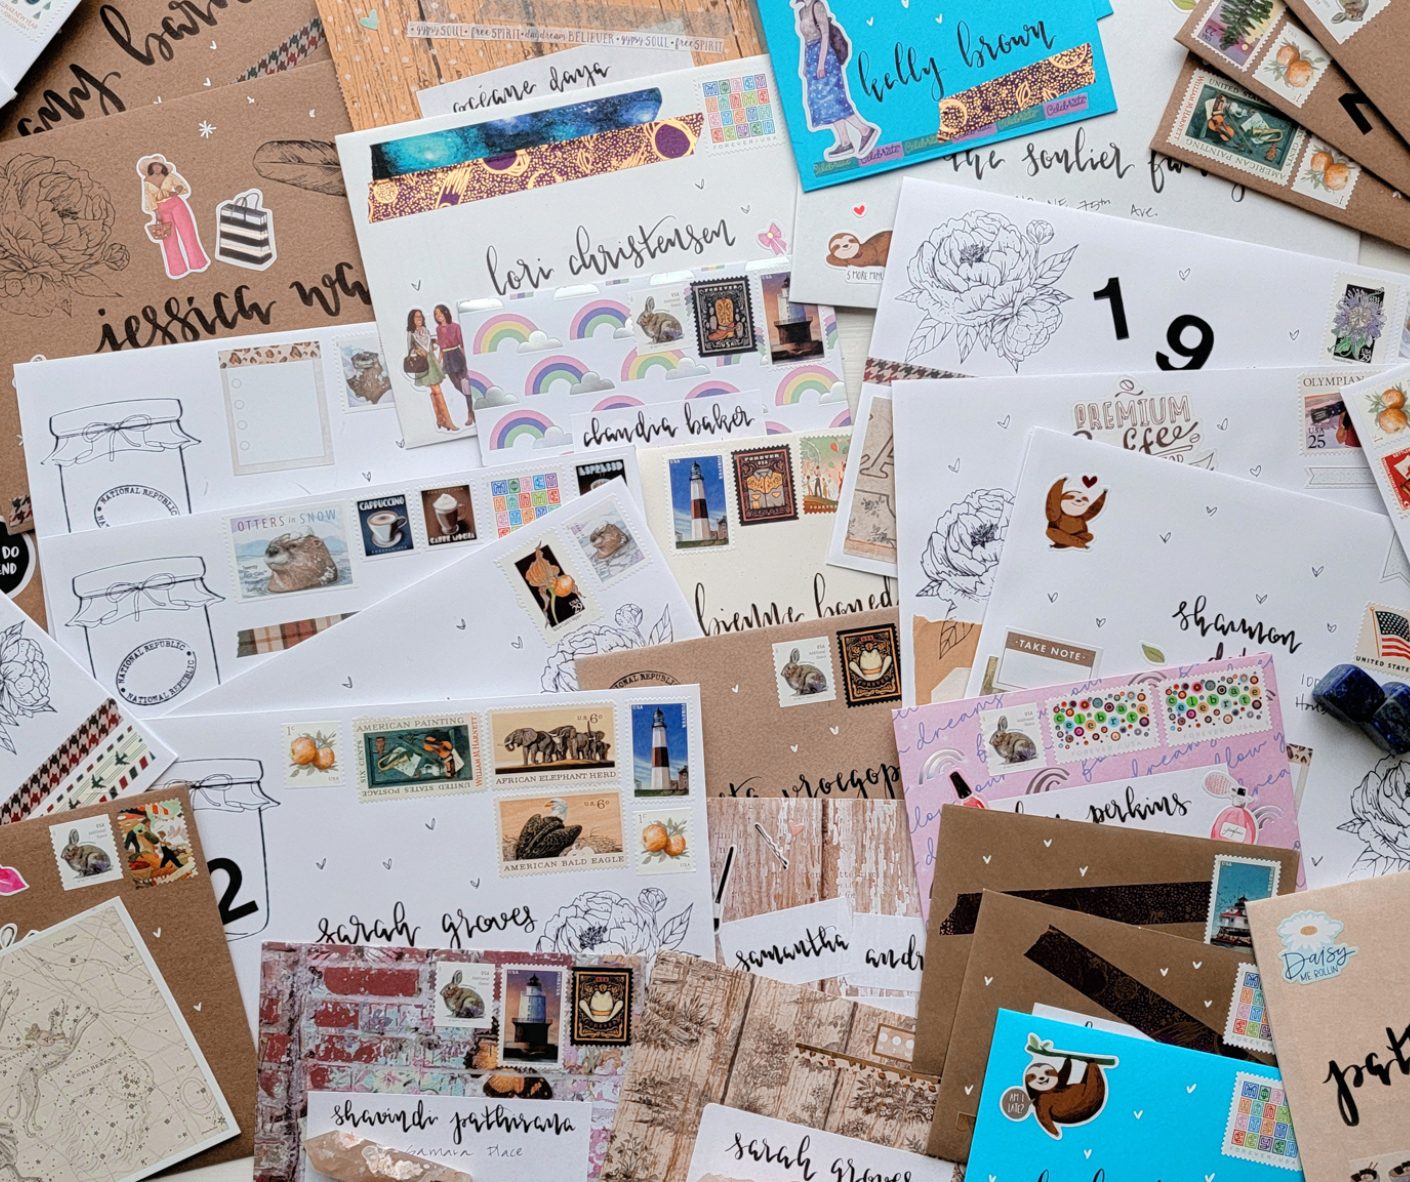 Module 1: Collection of Best Practices of artists involved in Mailart